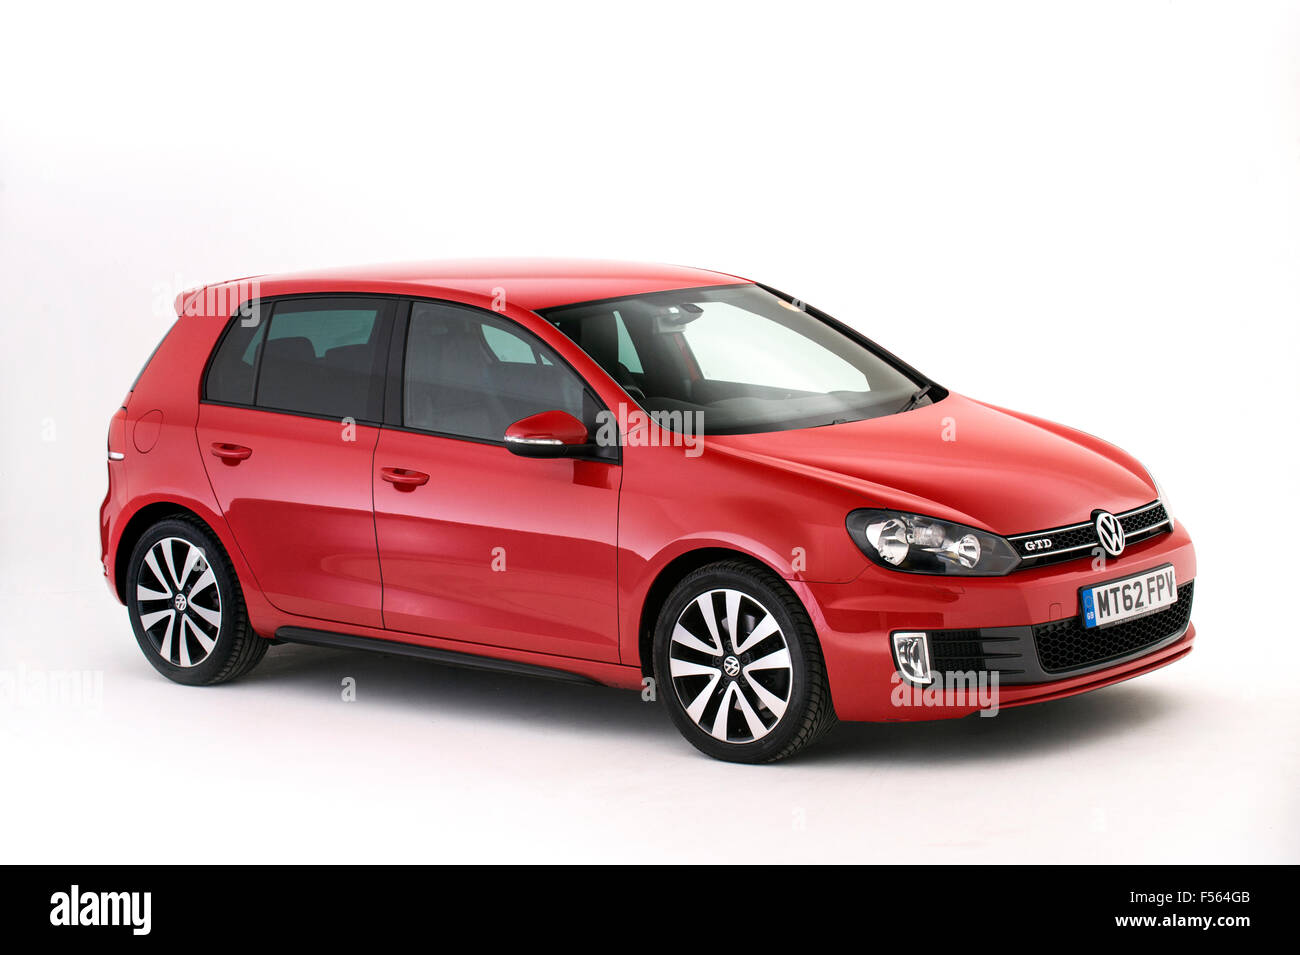 Volkswagen Golf 2012 High Resolution Stock Photography and Images - Alamy